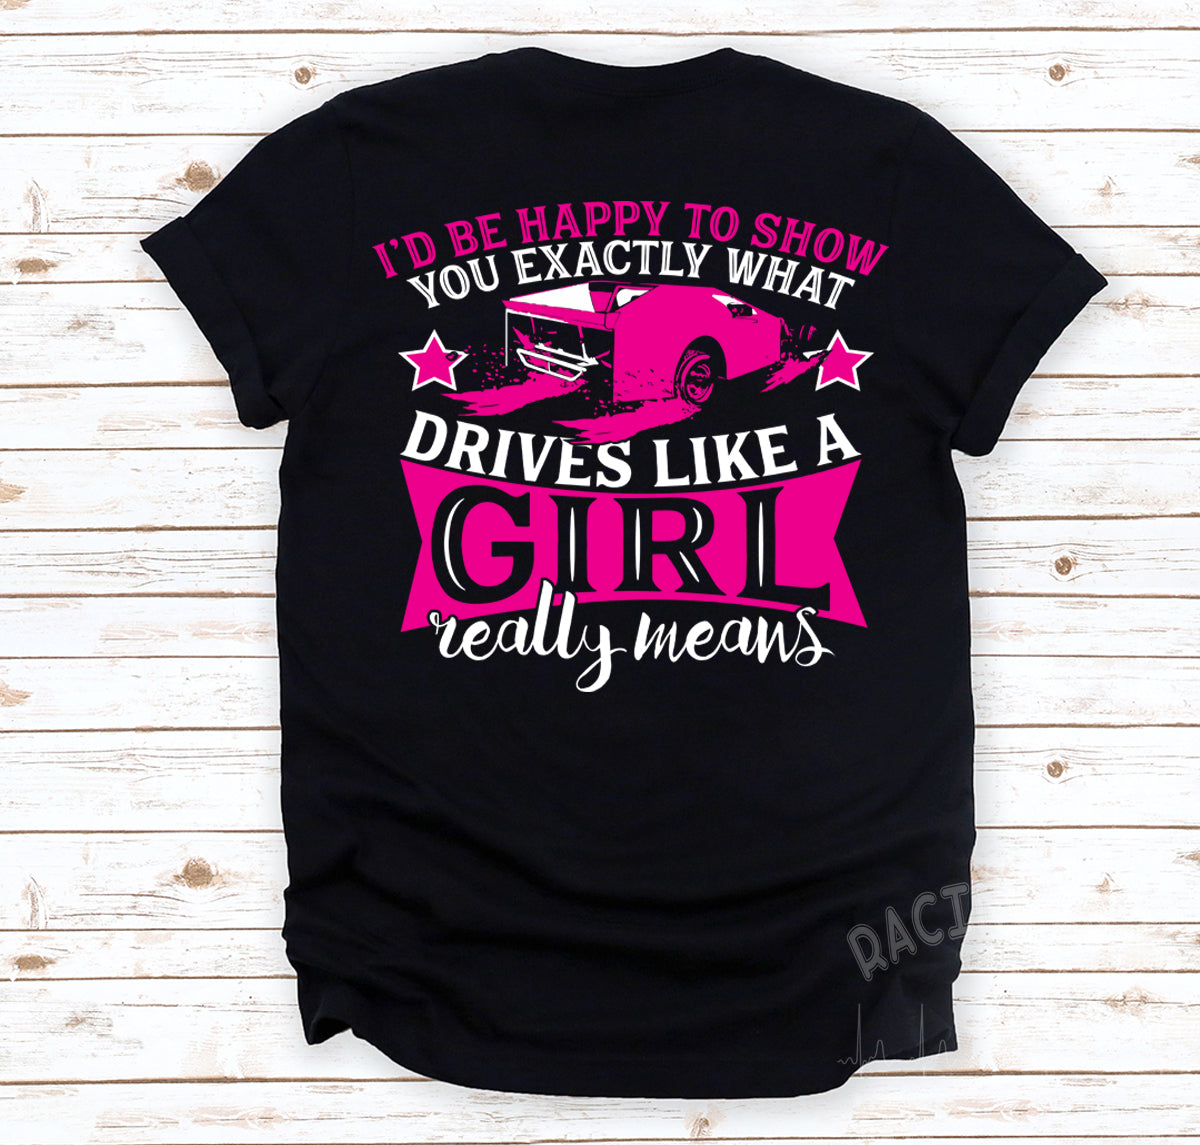 I'd Happy To Show You Exactly What Drives Like A Girl Really Means T-Shirts!